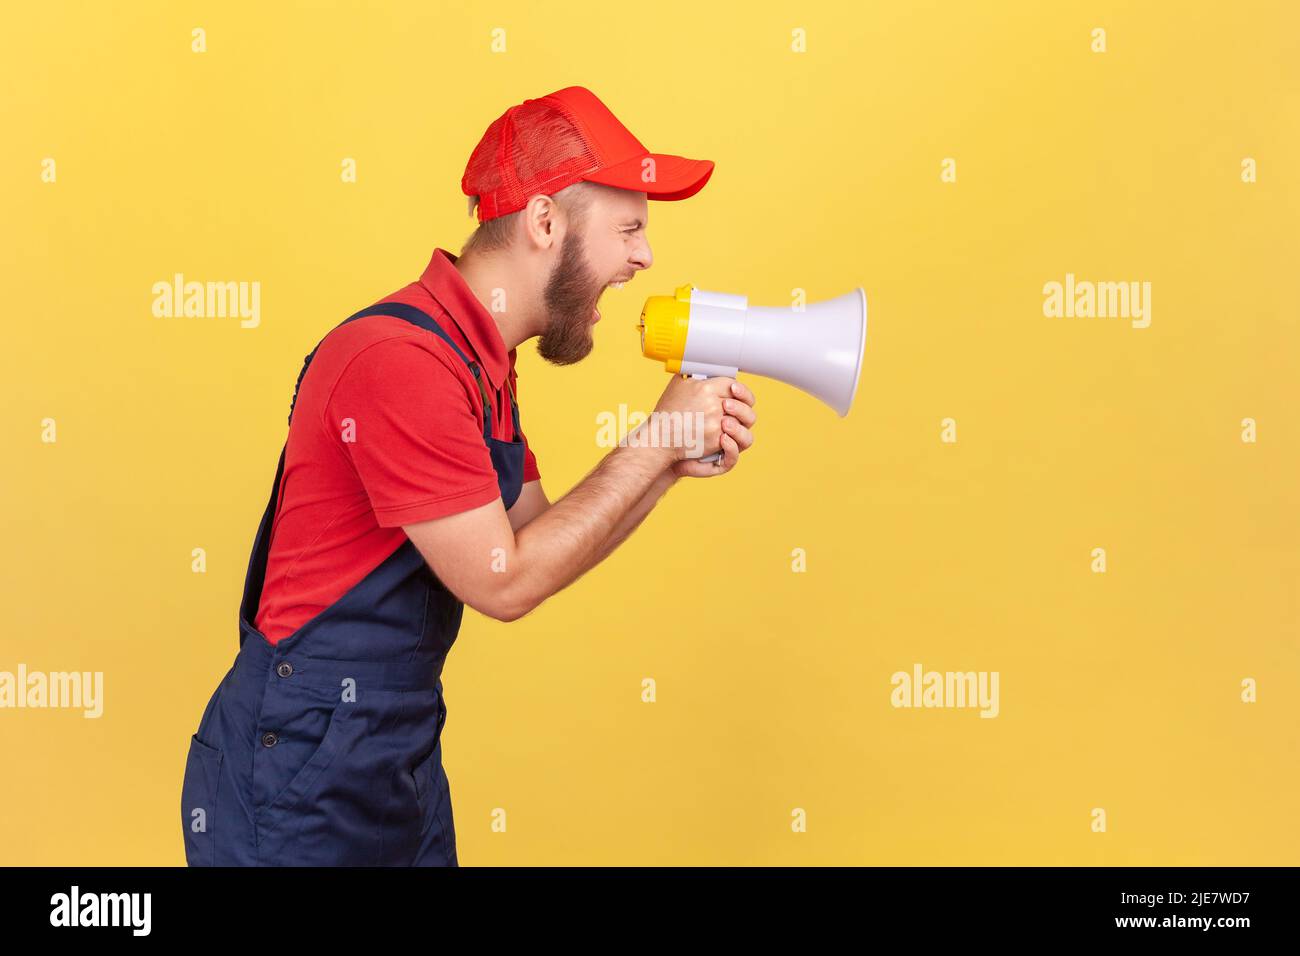 Side view portrait of angry bearded worker in blue uniform and red cap, holding megaphone and screaming with aggressive expression, protesting. Indoor studio shot isolated on yellow background. Stock Photo